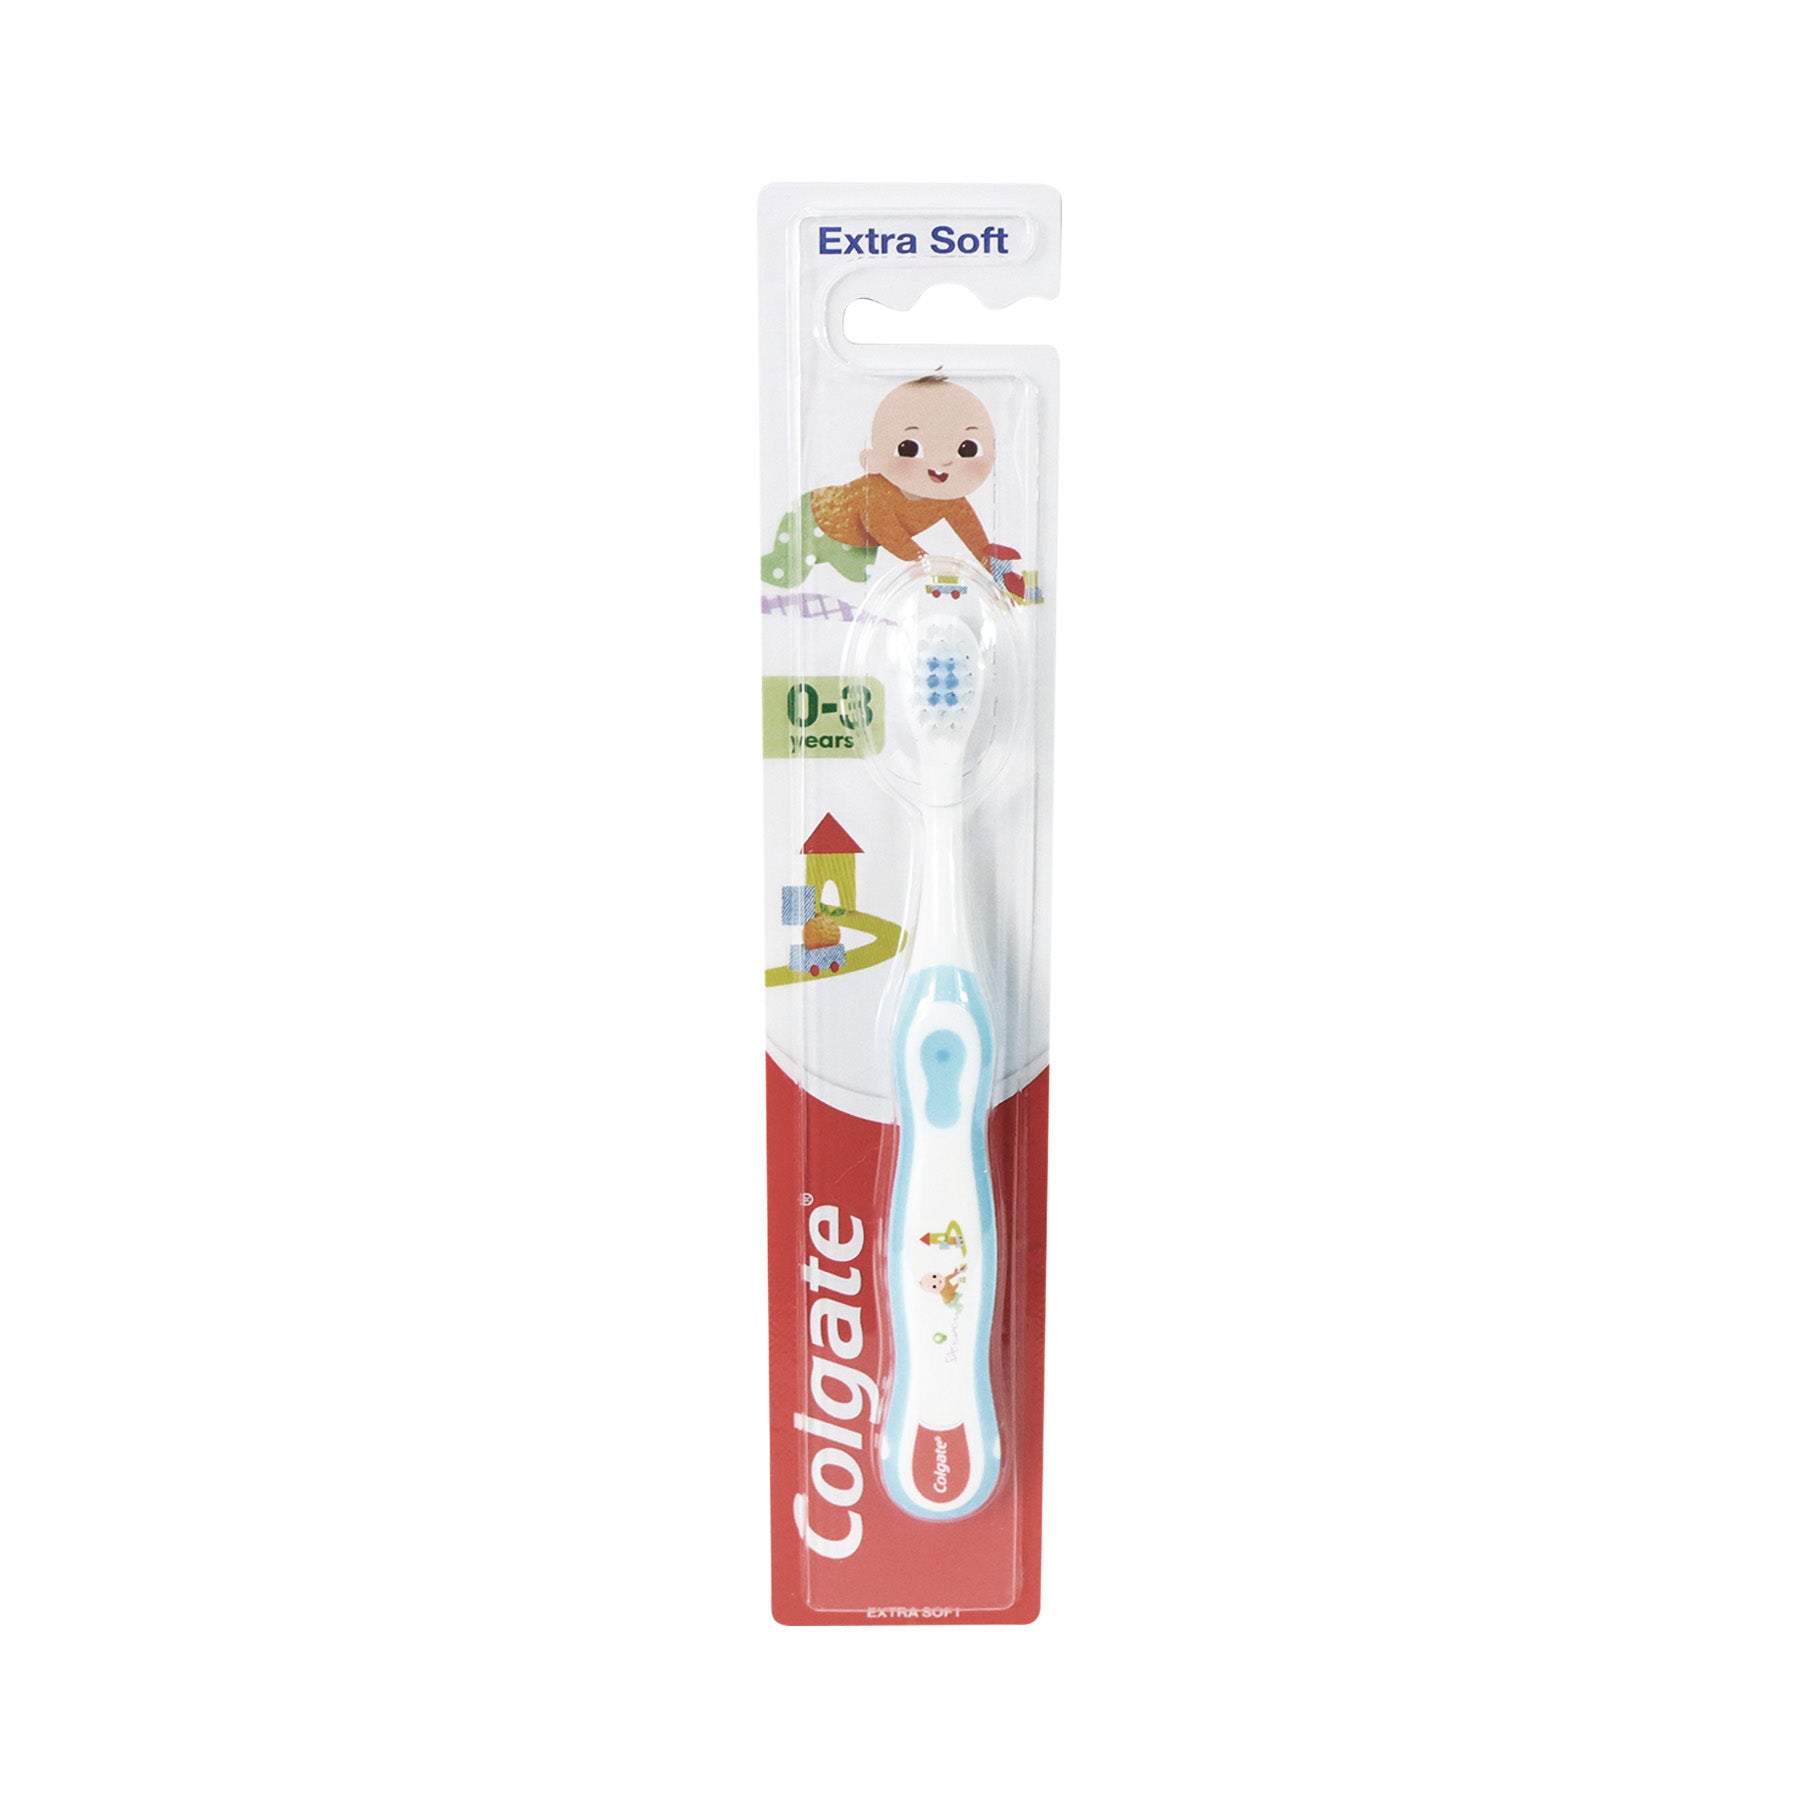 Colgate Kids Extra Soft Toothbrush (0-3 Years) (Blue)